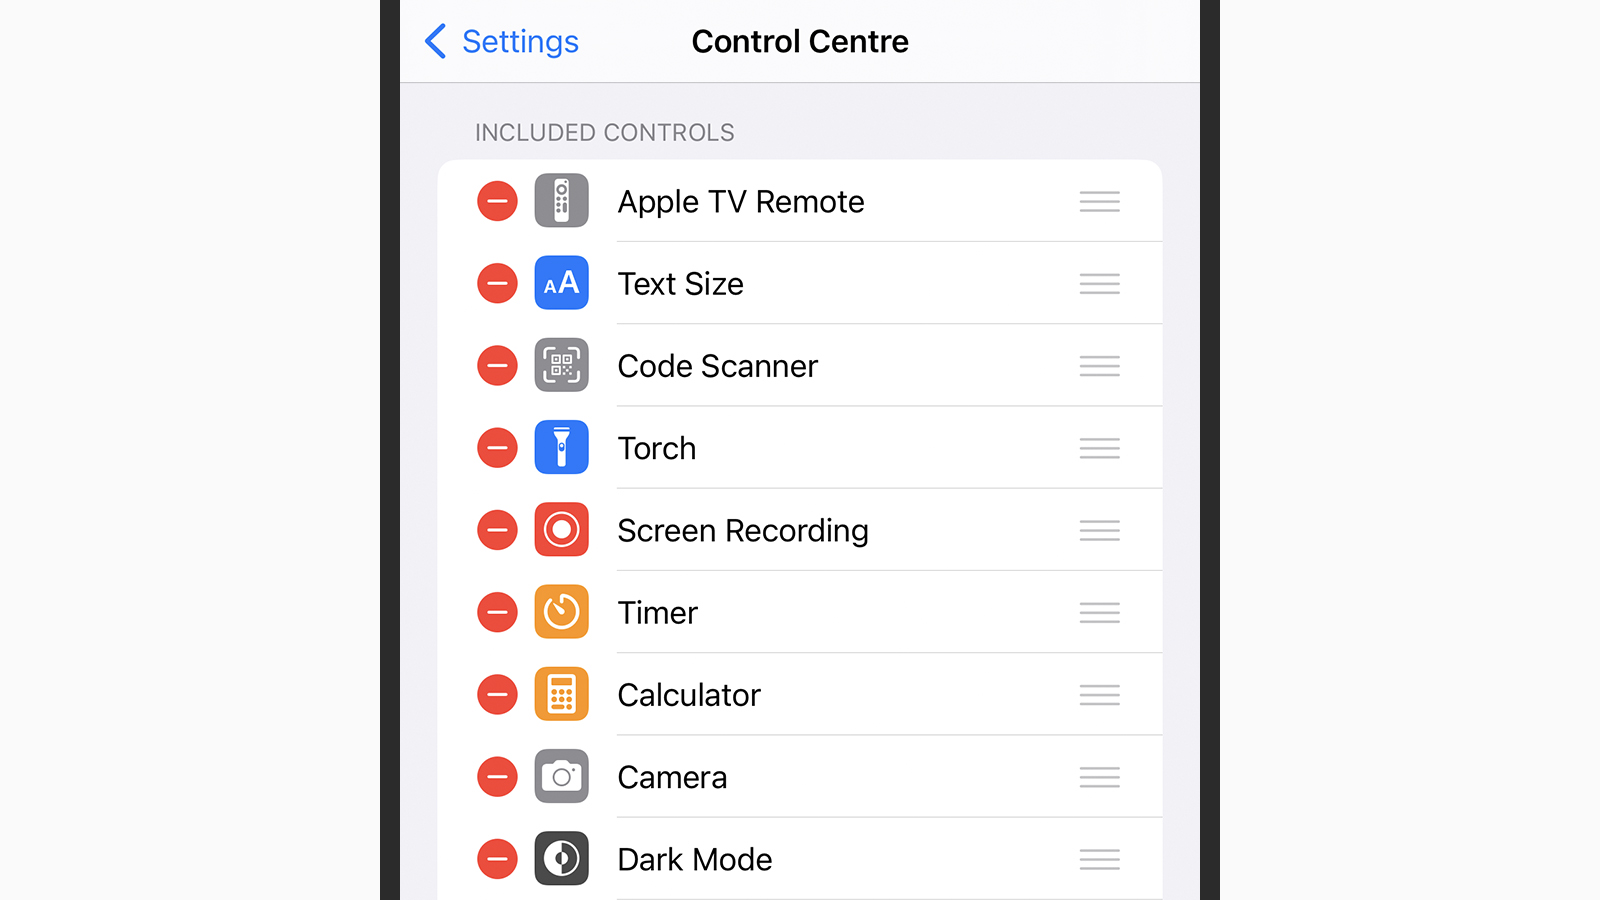 The options for using your iPhone as an Apple TV remote.